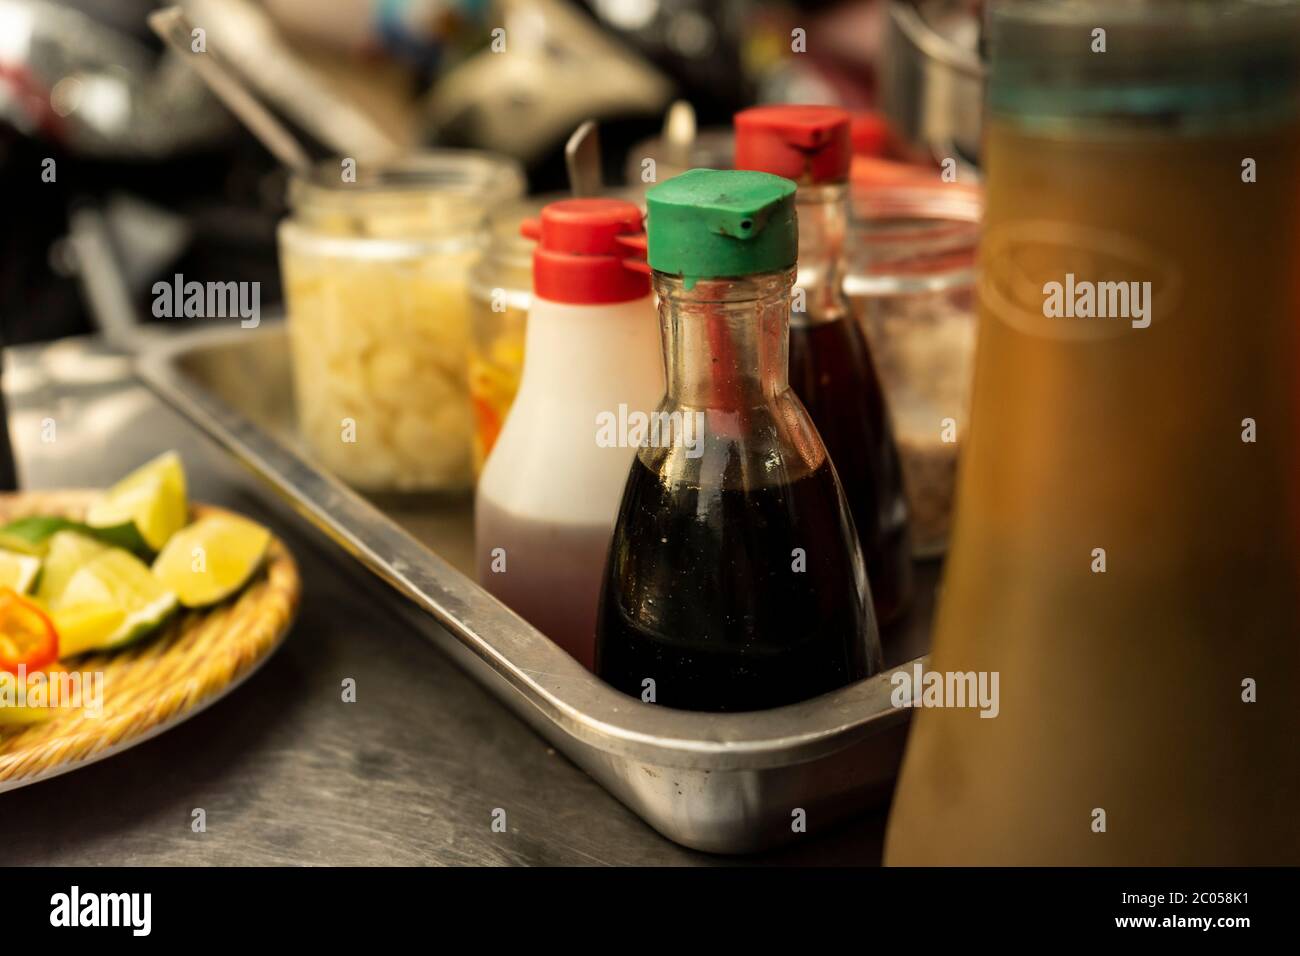 Traditional Vietnamese noodle condiment tray with dish of lemon slices, jar of chili, fish sauce, soy sauce, spoons and chopsticks at street food cart Stock Photo